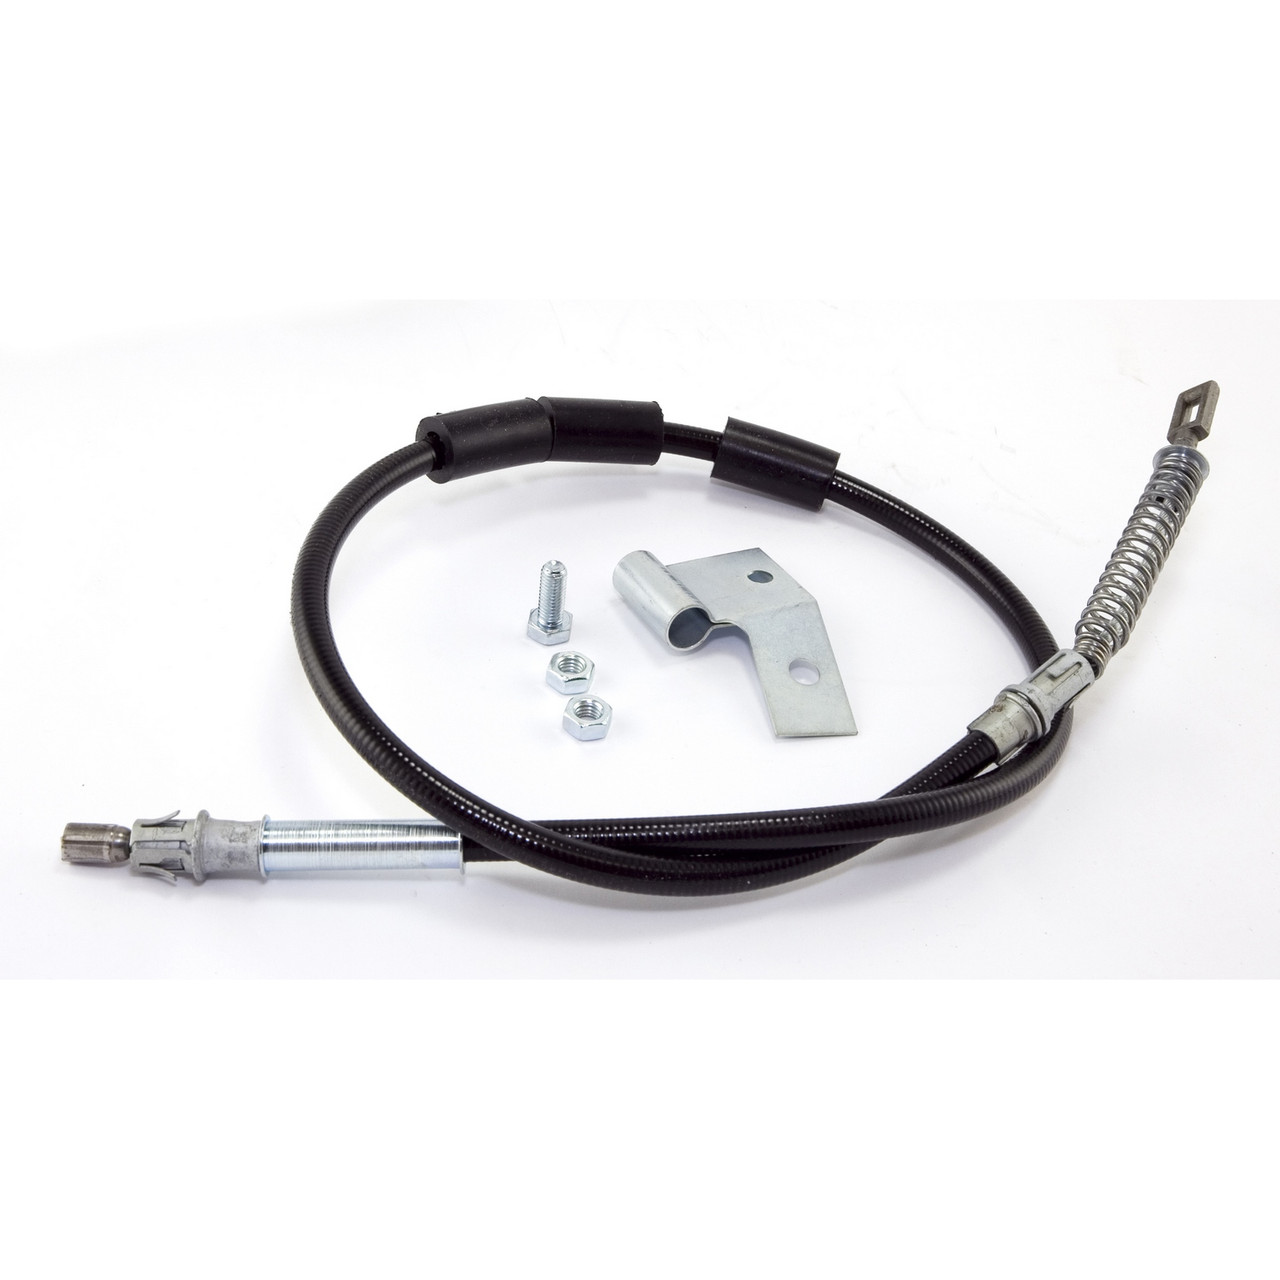 Buy Parking Brake Cable; 03-06 Jeep Wrangler TJ  Omix-ADA at  JeepHut Off-Road